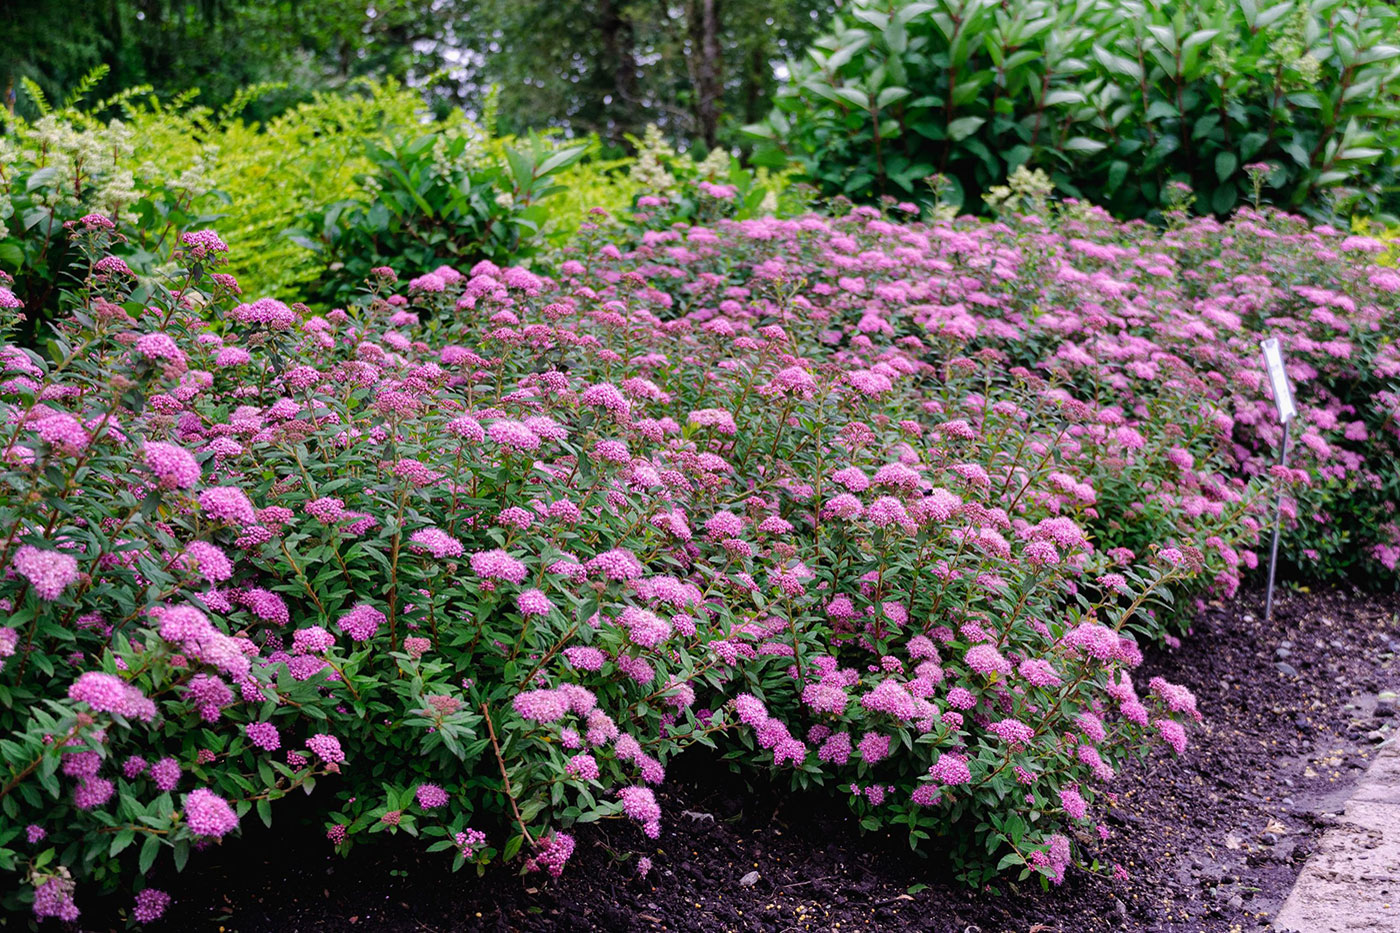 moeilijk telefoon maagd Spirea: New Look for an Old Favorite - Spireas are among the easiest  flowering shrubs to grow. Once considered somewhat 'common' or 'old  fashioned,' plant breeders have made vast improvements recently in